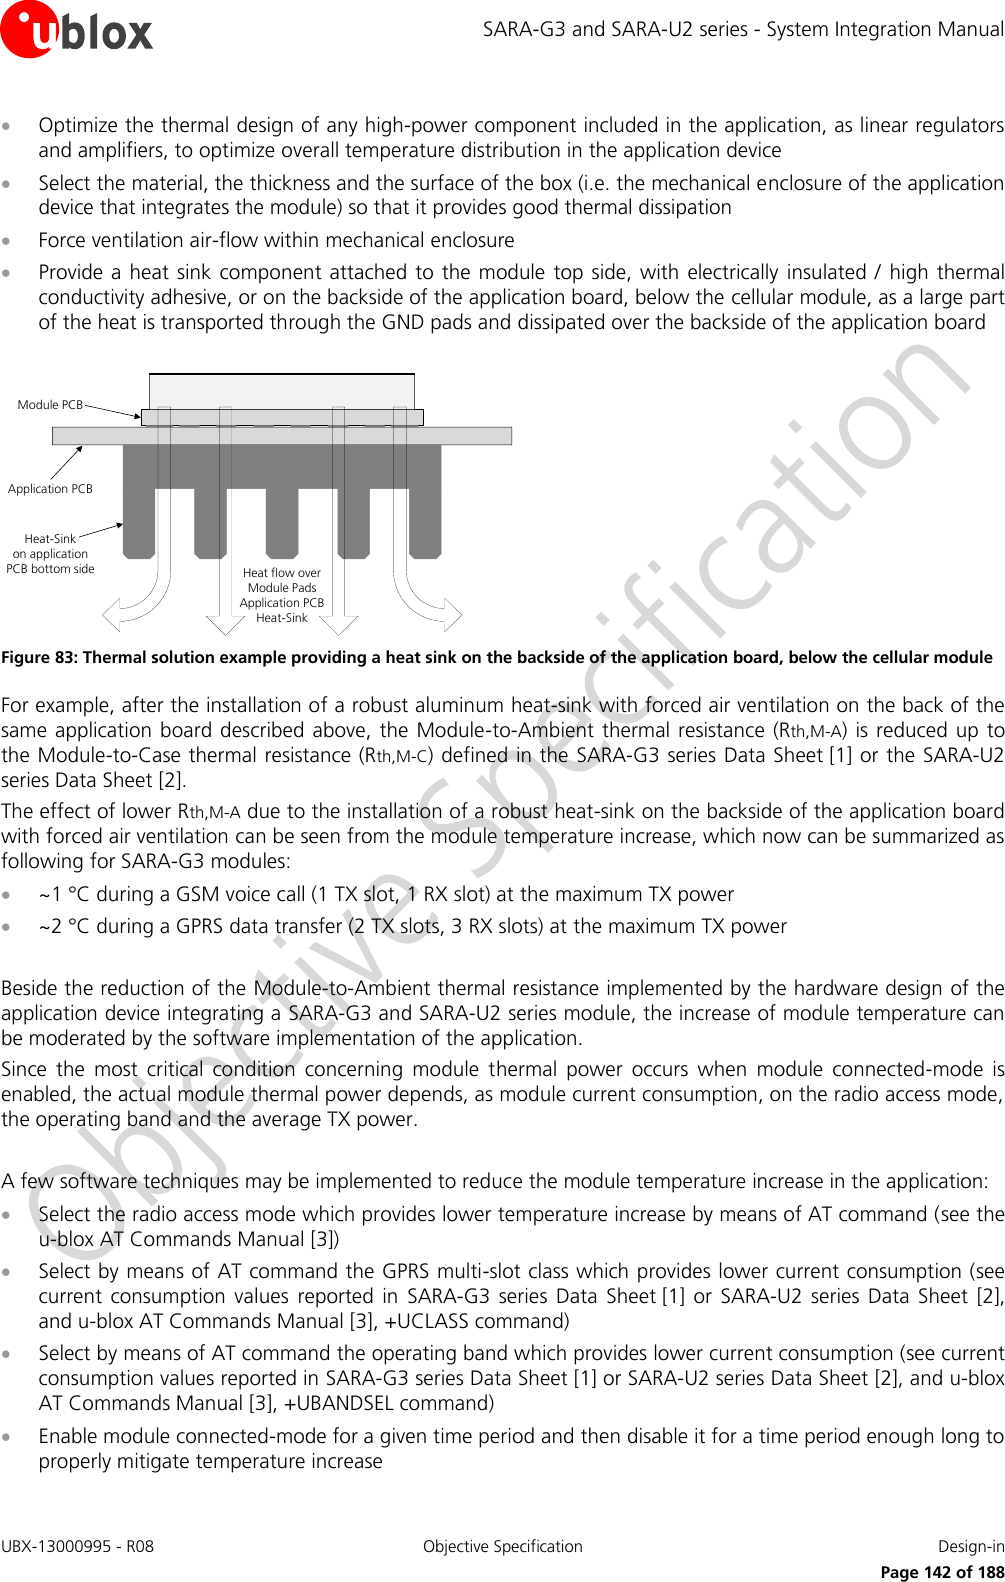 SARA-G3 and SARA-U2 series - System Integration Manual UBX-13000995 - R08  Objective Specification  Design-in     Page 142 of 188  Optimize the thermal design of any high-power component included in the application, as linear regulators and amplifiers, to optimize overall temperature distribution in the application device  Select the material, the thickness and the surface of the box (i.e. the mechanical enclosure of the application device that integrates the module) so that it provides good thermal dissipation  Force ventilation air-flow within mechanical enclosure  Provide a  heat sink component attached to  the module top  side, with electrically insulated /  high thermal conductivity adhesive, or on the backside of the application board, below the cellular module, as a large part of the heat is transported through the GND pads and dissipated over the backside of the application board  Module PCBHeat-Sink on application PCB bottom sideApplication PCBHeat flow overModule Pads Application PCB Heat-Sink Figure 83: Thermal solution example providing a heat sink on the backside of the application board, below the cellular module For example, after the installation of a robust aluminum heat-sink with forced air ventilation on the back of the same application  board described  above, the Module-to-Ambient thermal resistance (Rth,M-A)  is reduced up to the Module-to-Case thermal resistance (Rth,M-C) defined in the SARA-G3 series Data Sheet [1] or the SARA-U2 series Data Sheet [2]. The effect of lower Rth,M-A due to the installation of a robust heat-sink on the backside of the application board with forced air ventilation can be seen from the module temperature increase, which now can be summarized as following for SARA-G3 modules:  ~1 °C during a GSM voice call (1 TX slot, 1 RX slot) at the maximum TX power  ~2 °C during a GPRS data transfer (2 TX slots, 3 RX slots) at the maximum TX power  Beside the reduction of the Module-to-Ambient thermal resistance implemented by the hardware design of the application device integrating a SARA-G3 and SARA-U2 series module, the increase of module temperature can be moderated by the software implementation of the application. Since  the  most  critical  condition  concerning  module  thermal  power  occurs  when  module  connected-mode  is enabled, the actual module thermal power depends, as module current consumption, on the radio access mode, the operating band and the average TX power.  A few software techniques may be implemented to reduce the module temperature increase in the application:  Select the radio access mode which provides lower temperature increase by means of AT command (see the u-blox AT Commands Manual [3])   Select by means of AT command the GPRS multi-slot class which provides lower current consumption (see current  consumption  values  reported  in  SARA-G3 series  Data  Sheet [1]  or  SARA-U2  series  Data  Sheet [2], and u-blox AT Commands Manual [3], +UCLASS command)   Select by means of AT command the operating band which provides lower current consumption (see current consumption values reported in SARA-G3 series Data Sheet [1] or SARA-U2 series Data Sheet [2], and u-blox AT Commands Manual [3], +UBANDSEL command)   Enable module connected-mode for a given time period and then disable it for a time period enough long to properly mitigate temperature increase  